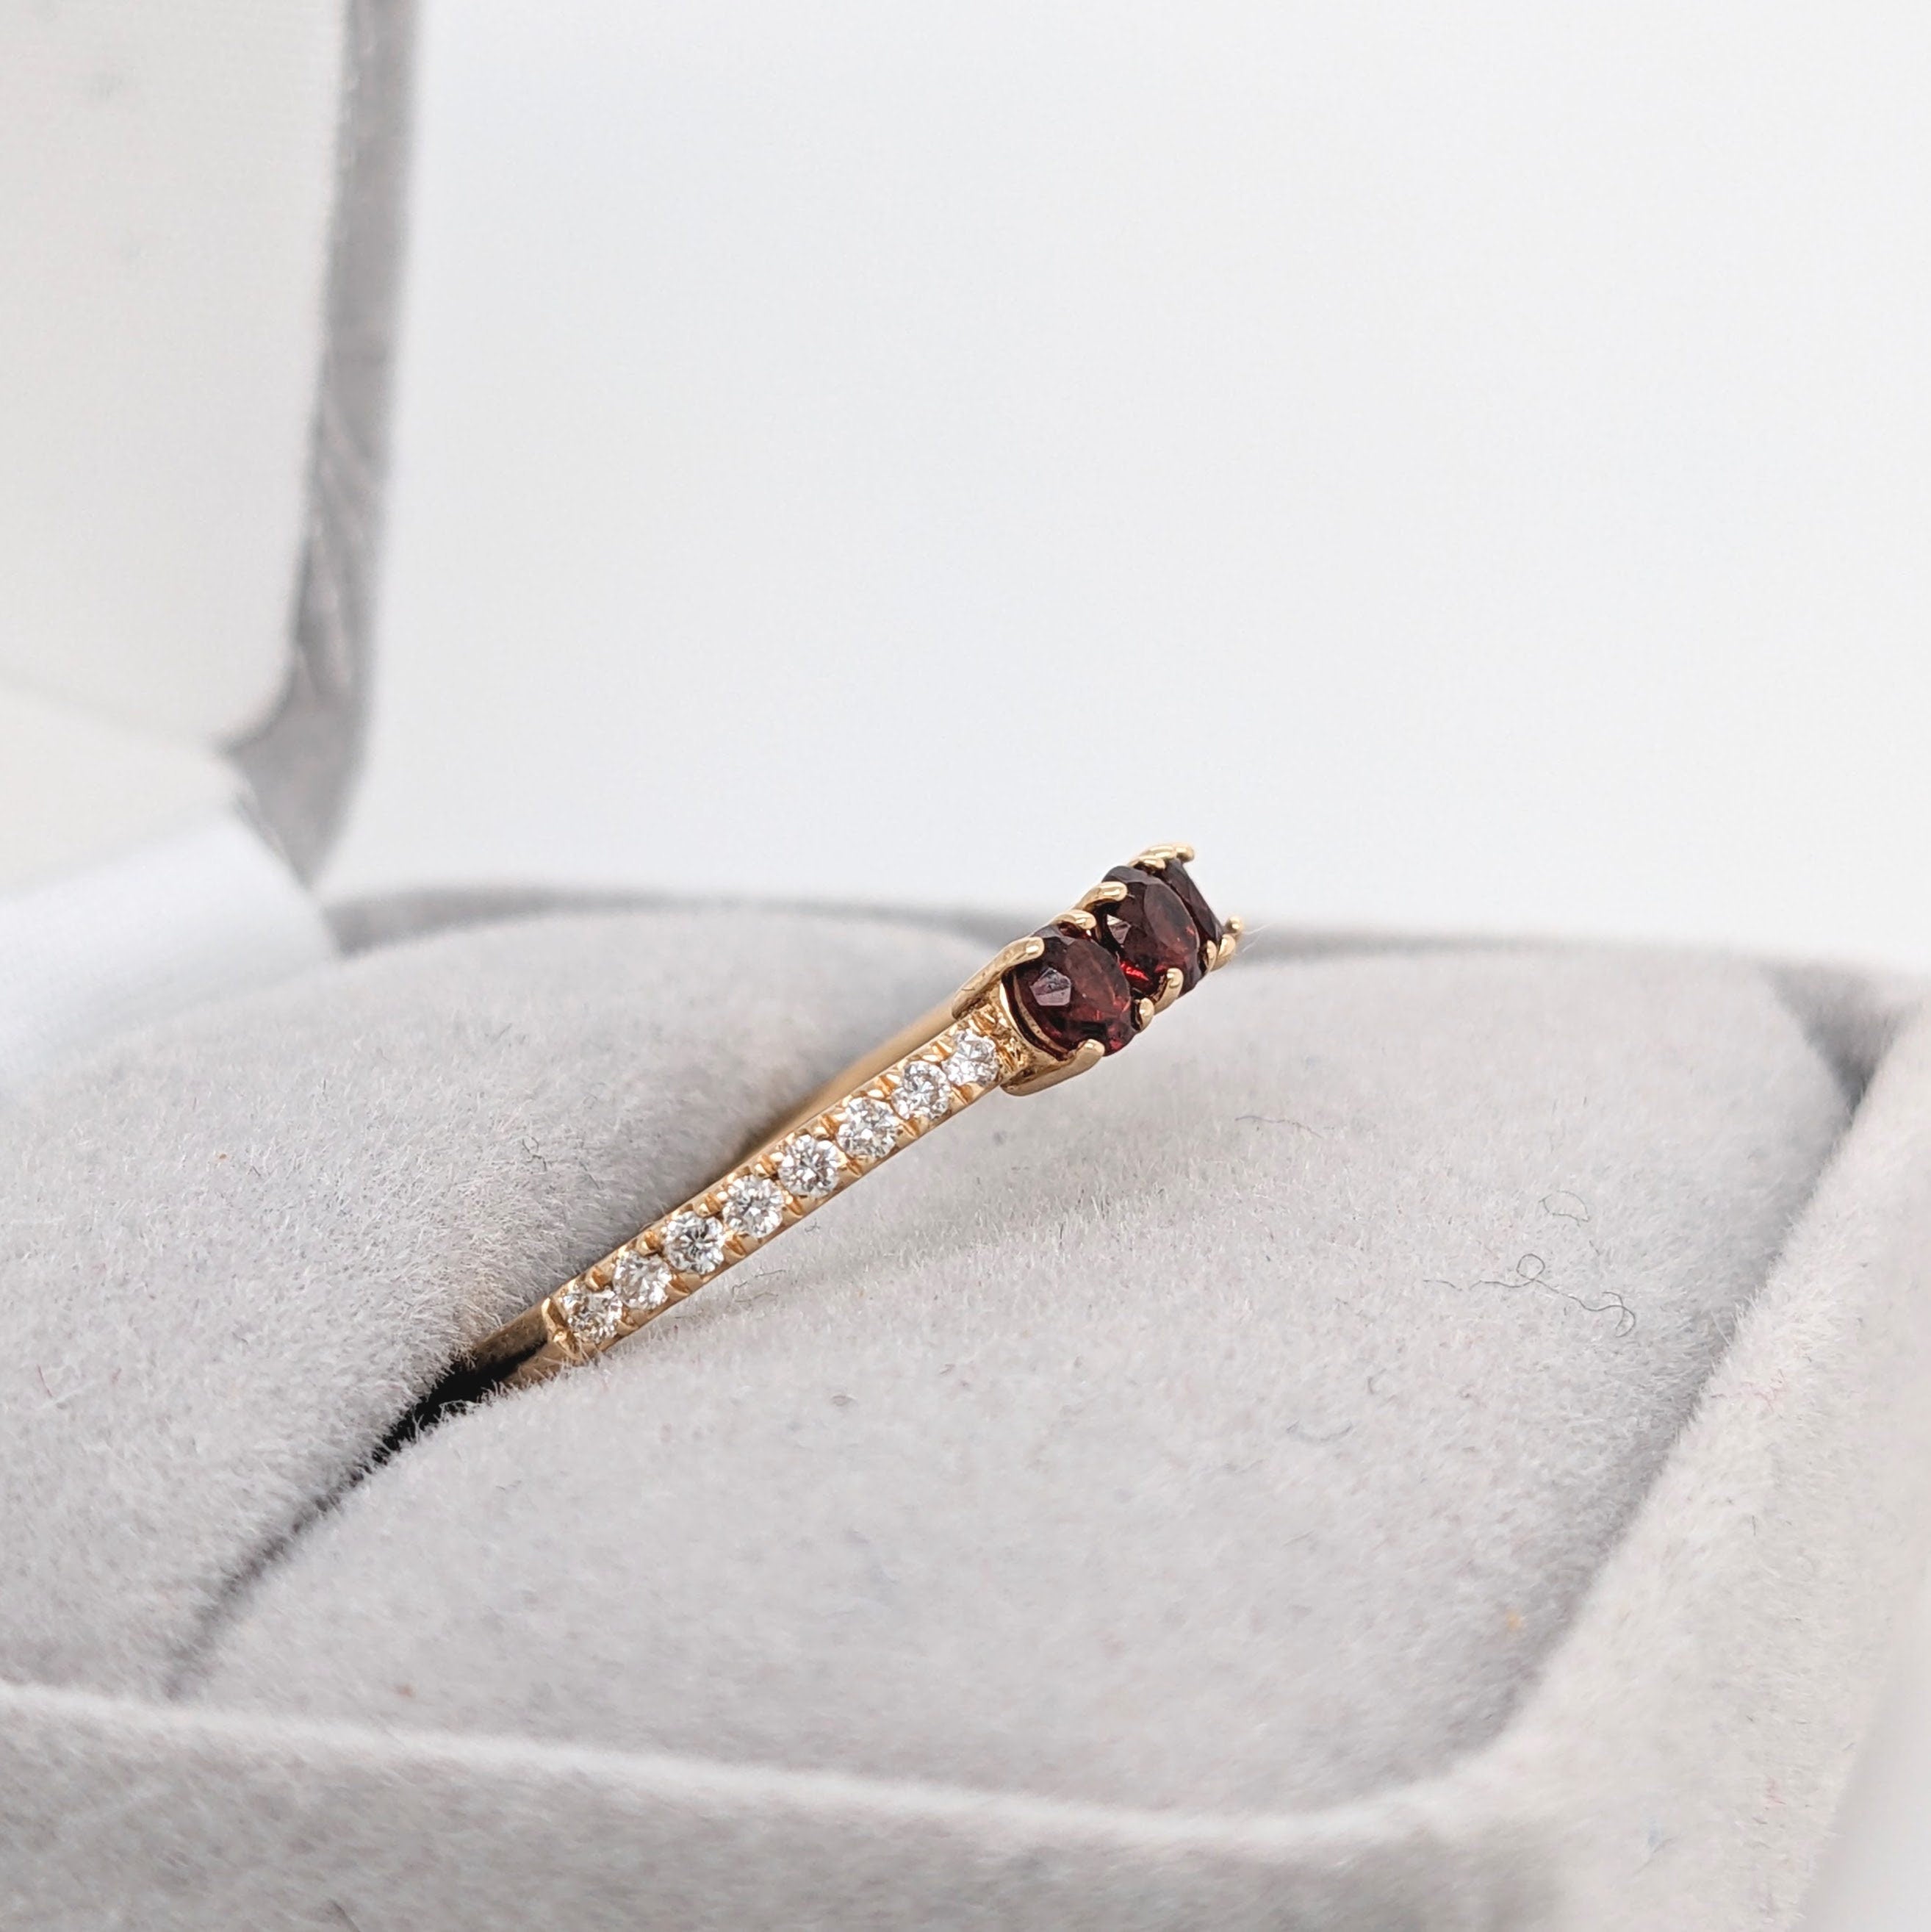 3 Stone Garnet Ring w Natural Accent Diamonds in Solid 14k Yellow Gold | Pave Shank | Round Cut 3mm | Classic Design | January Birthstone